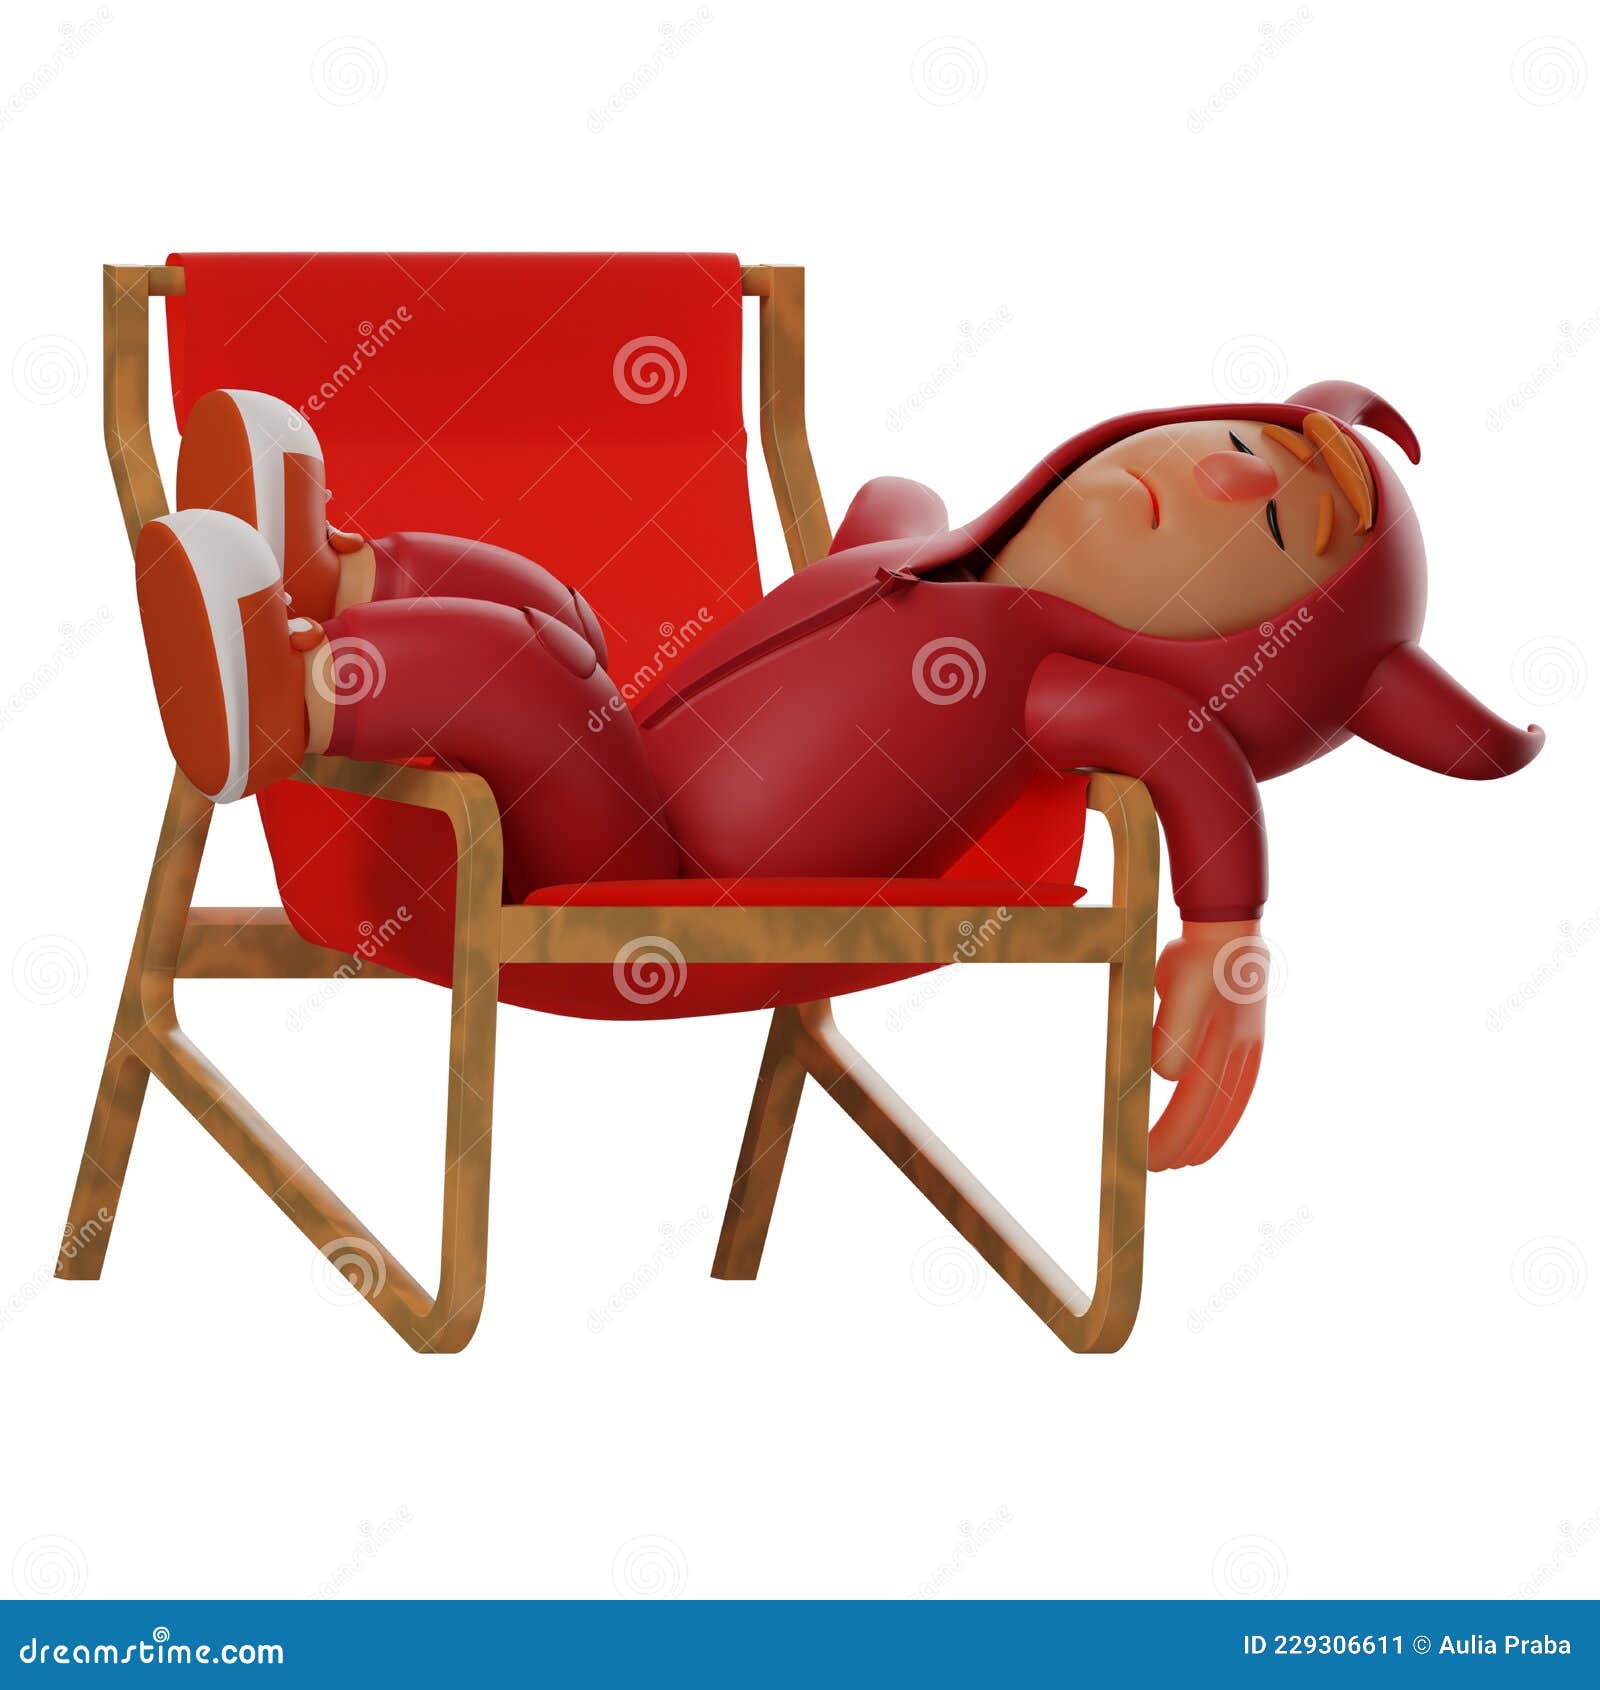 3D Red Devil Cartoon Character Sleeping on a Red Chair Stock Illustration -  Illustration of sitting, clothing: 229306611